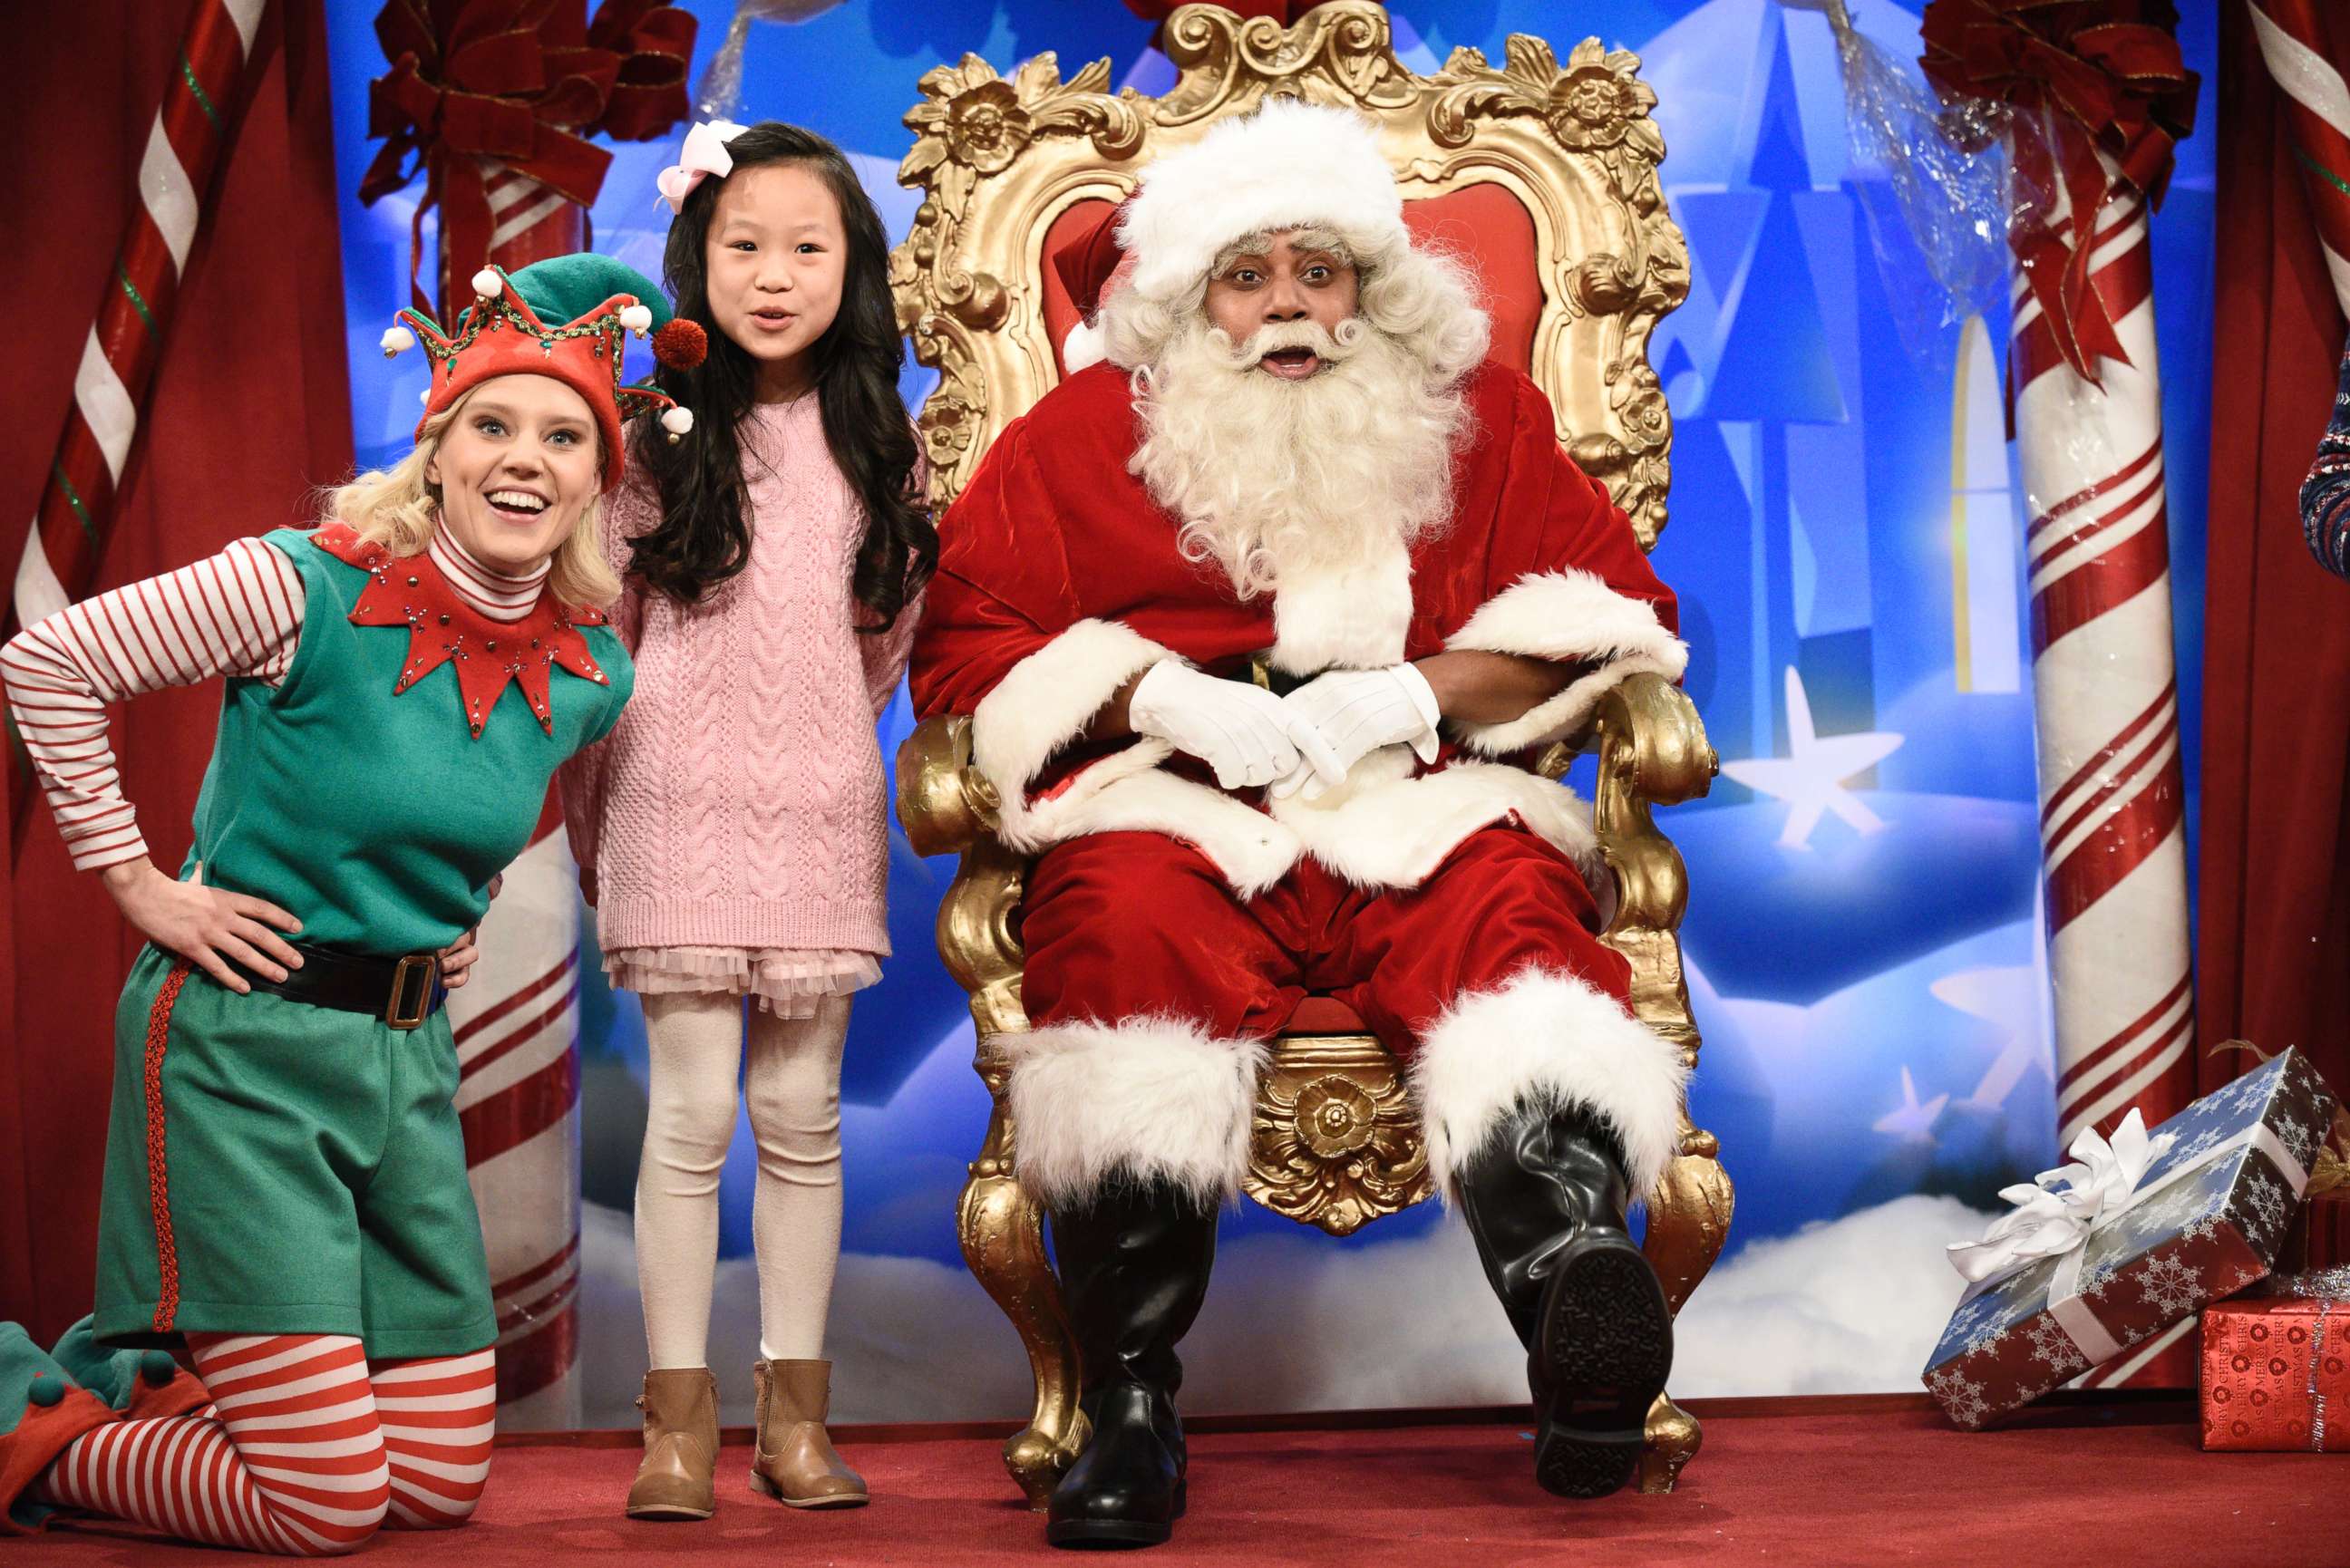 PHOTO: SATURDAY NIGHT LIVE -- Episode 1733 -- Pictured: (l-r) Kate McKinnon as an Elf, Kenan Thompson as Santa during "Visit with Santa Cold Open" on Saturday, December 9, 2017